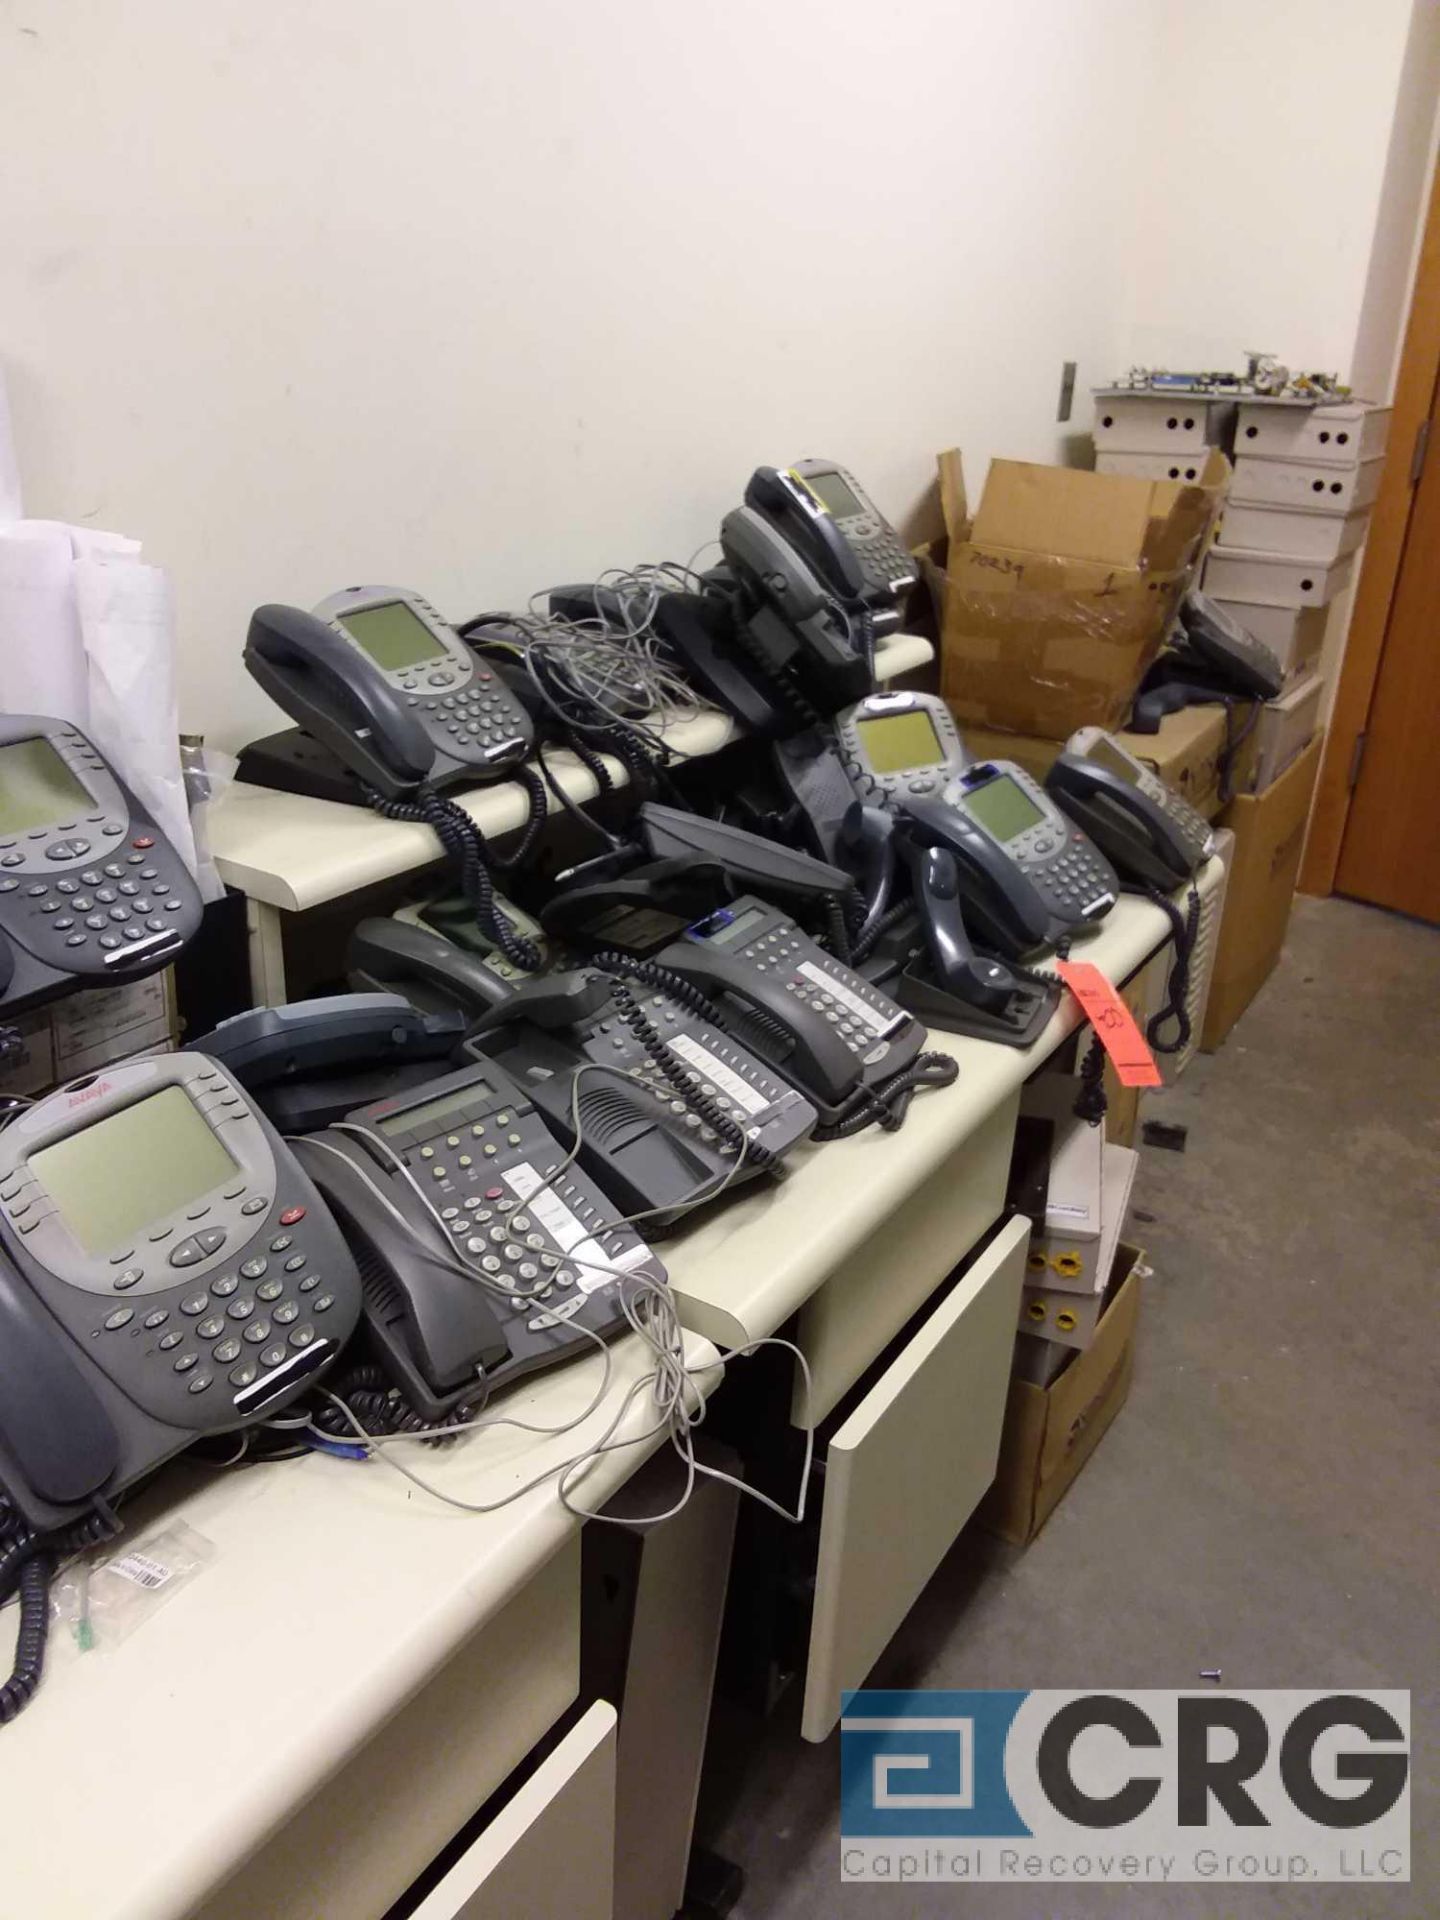 Lot of (100+) Lucent/Avaya 2420D01A-2001 telephone handsets, and components, with contents of - Image 3 of 4